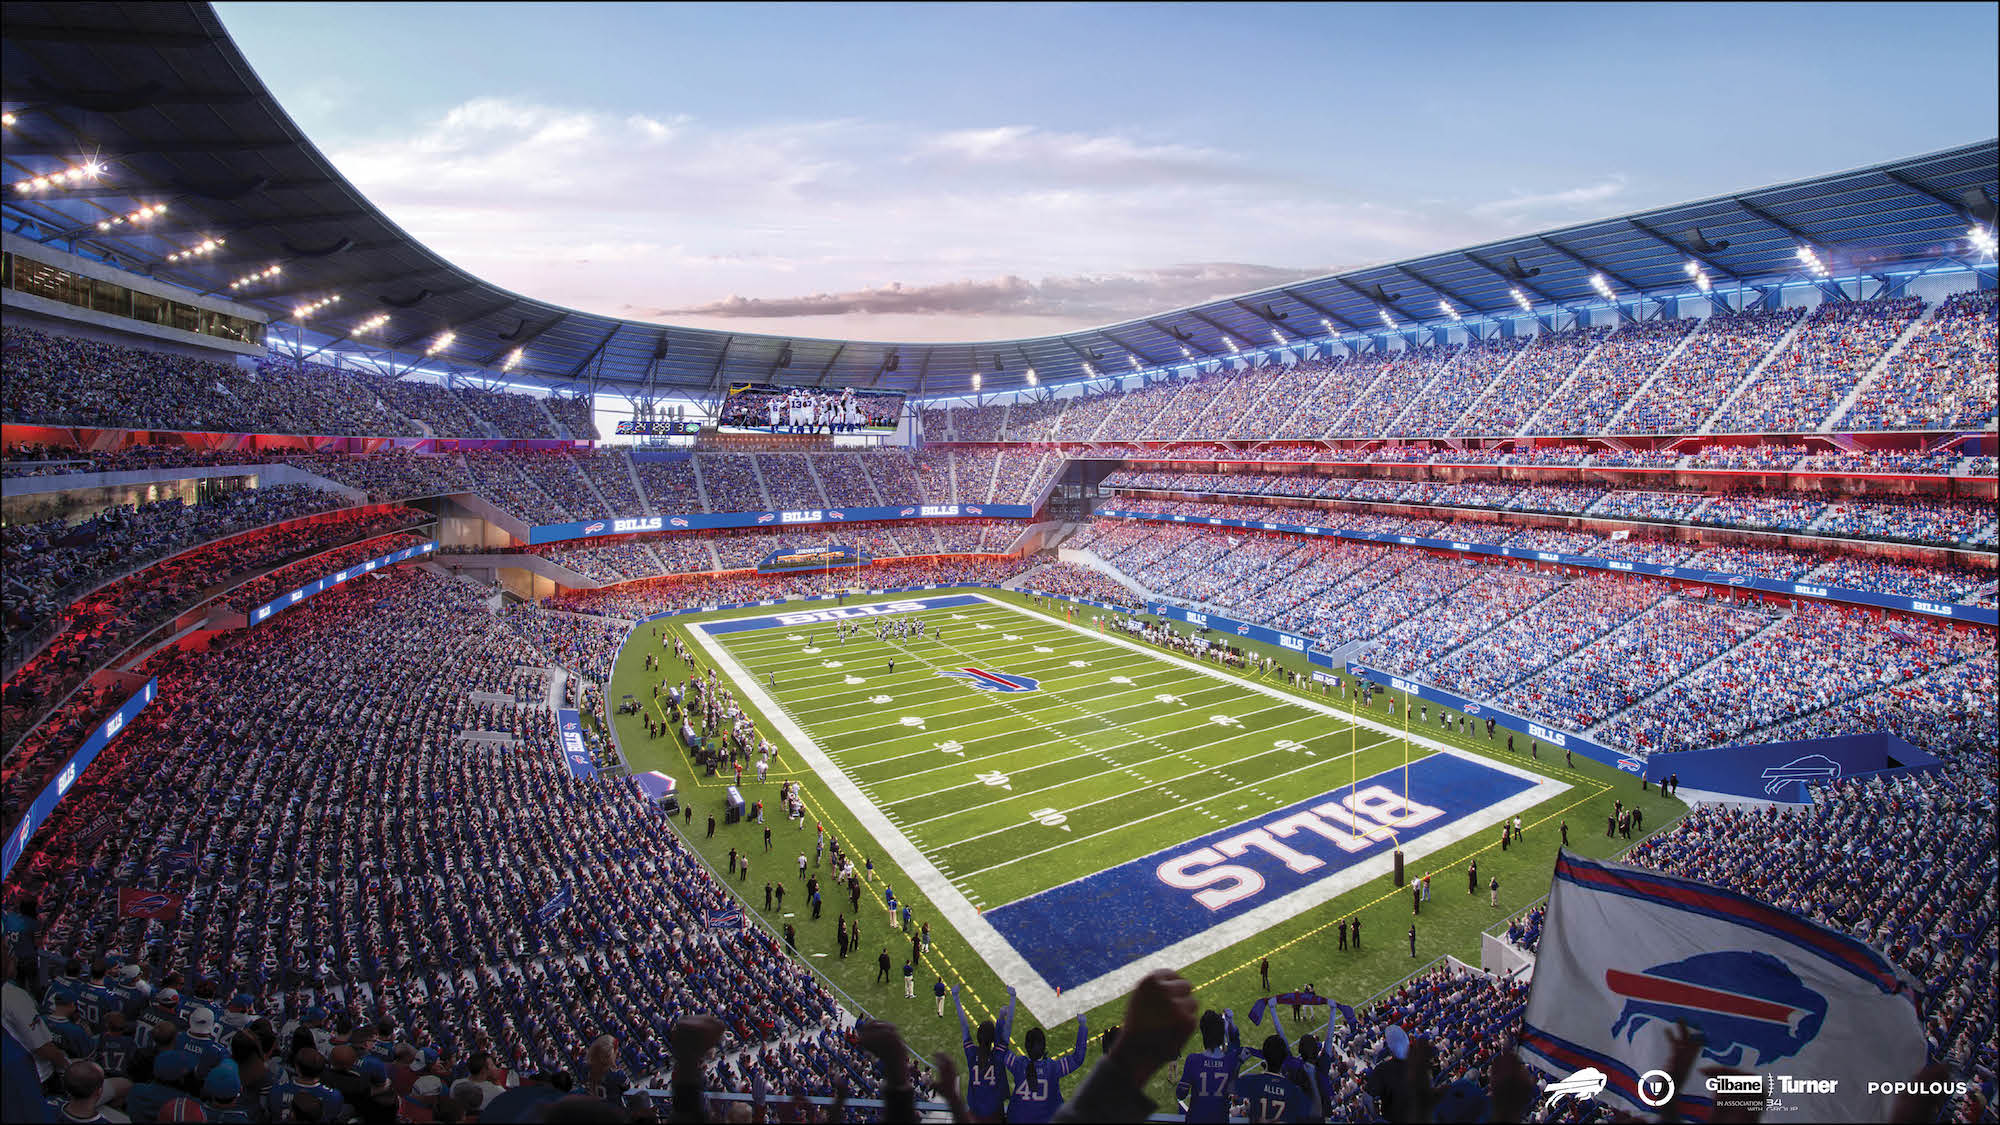 Gilbane, Turner, Populous tapped to design and build new Buffalo Bills